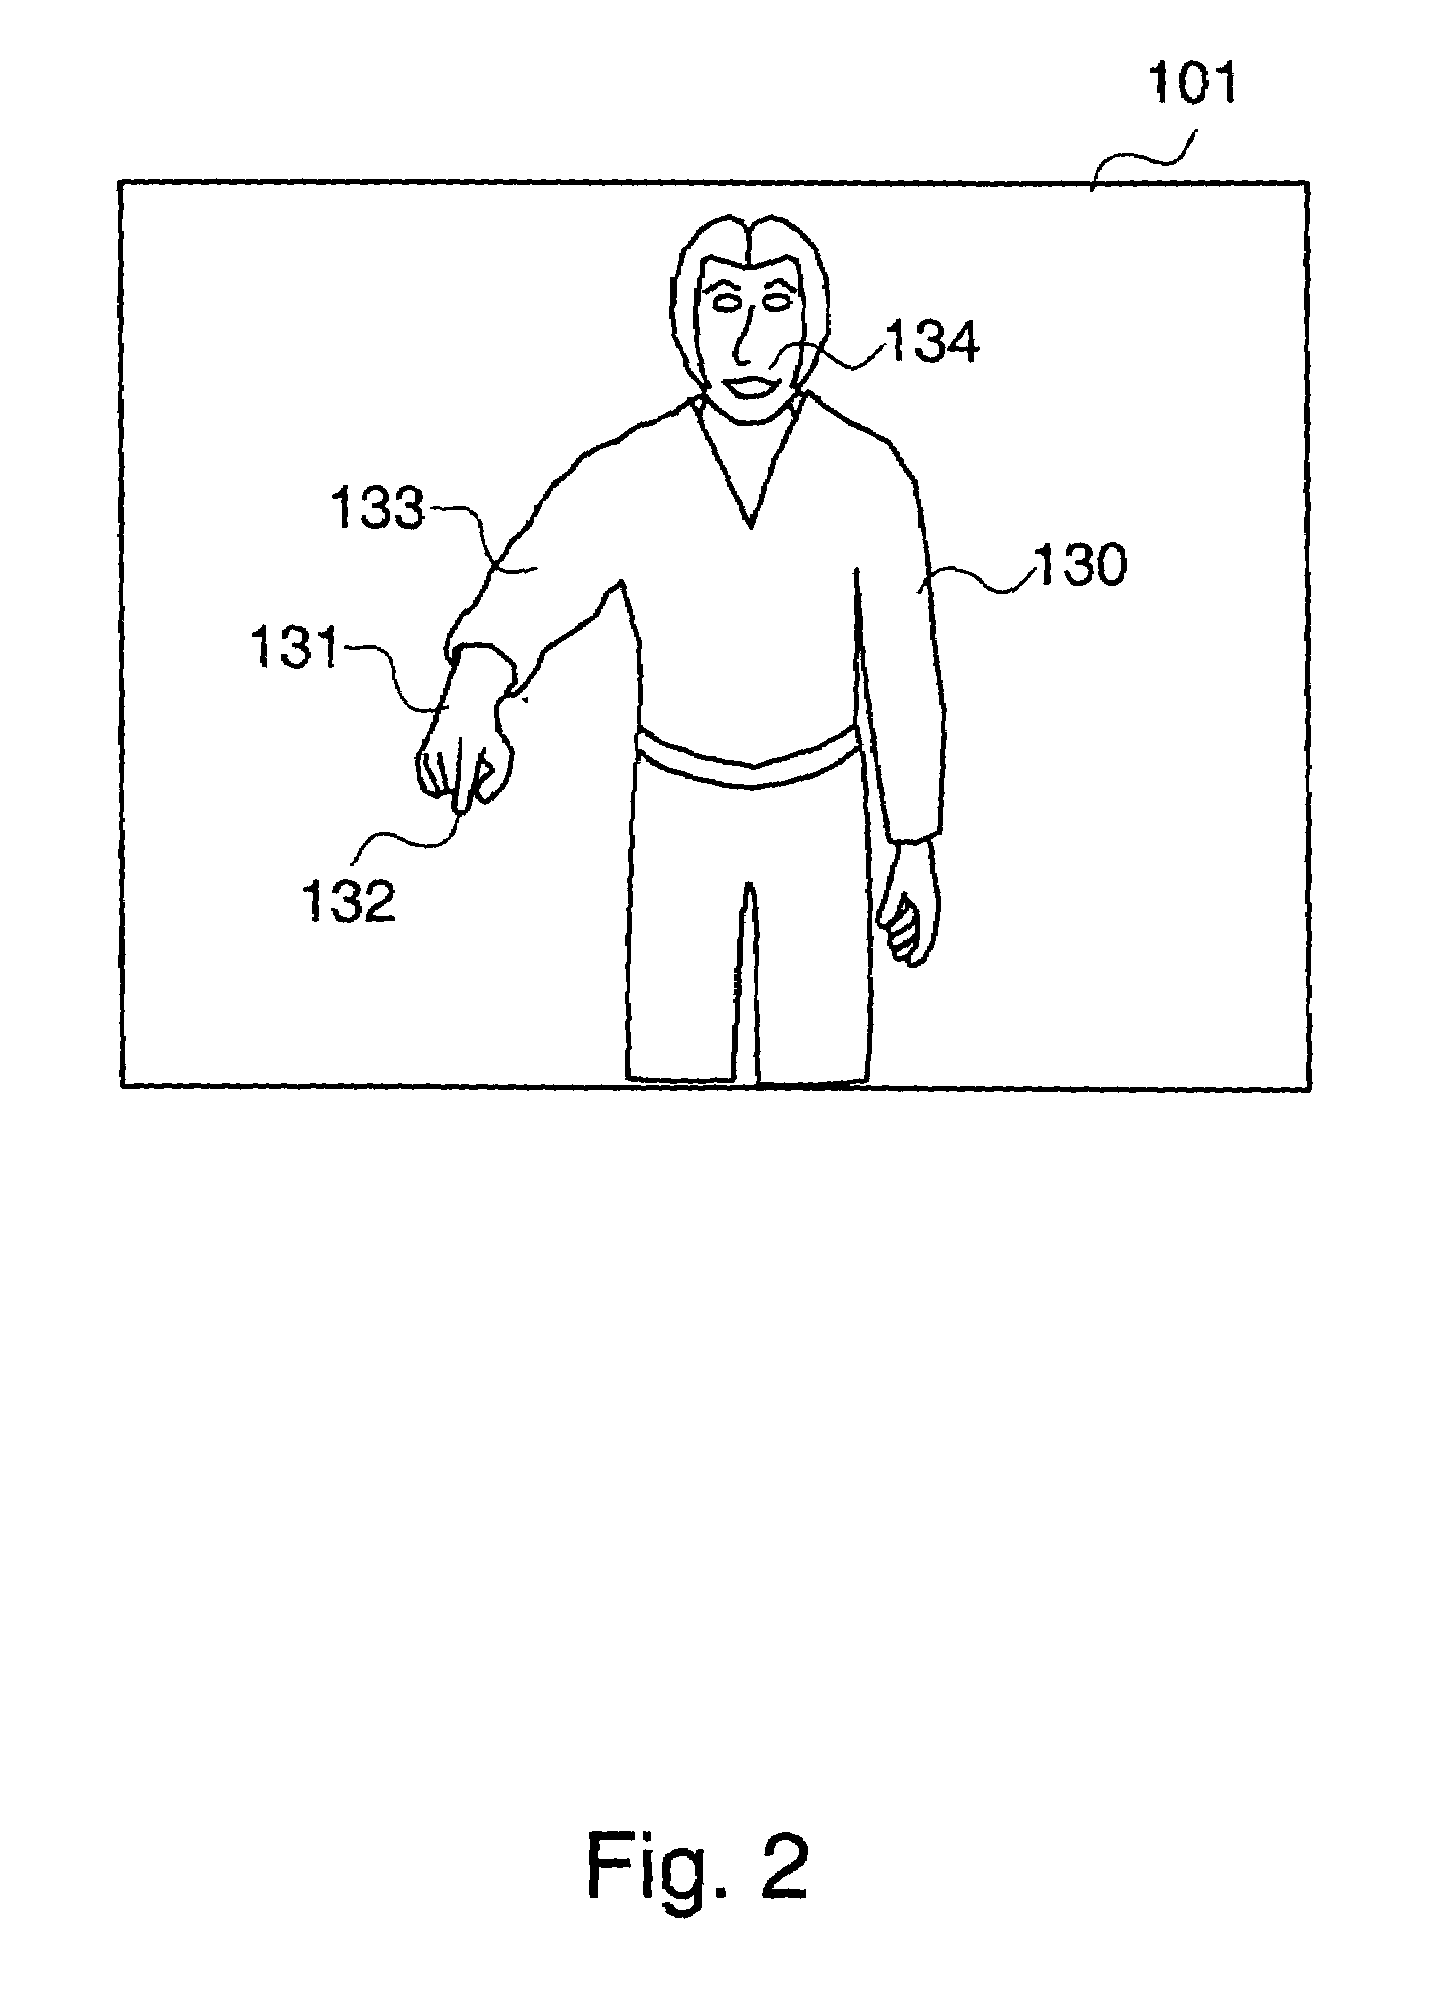 Method and system for detecting conscious hand movement patterns and computer-generated visual feedback for facilitating human-computer interaction